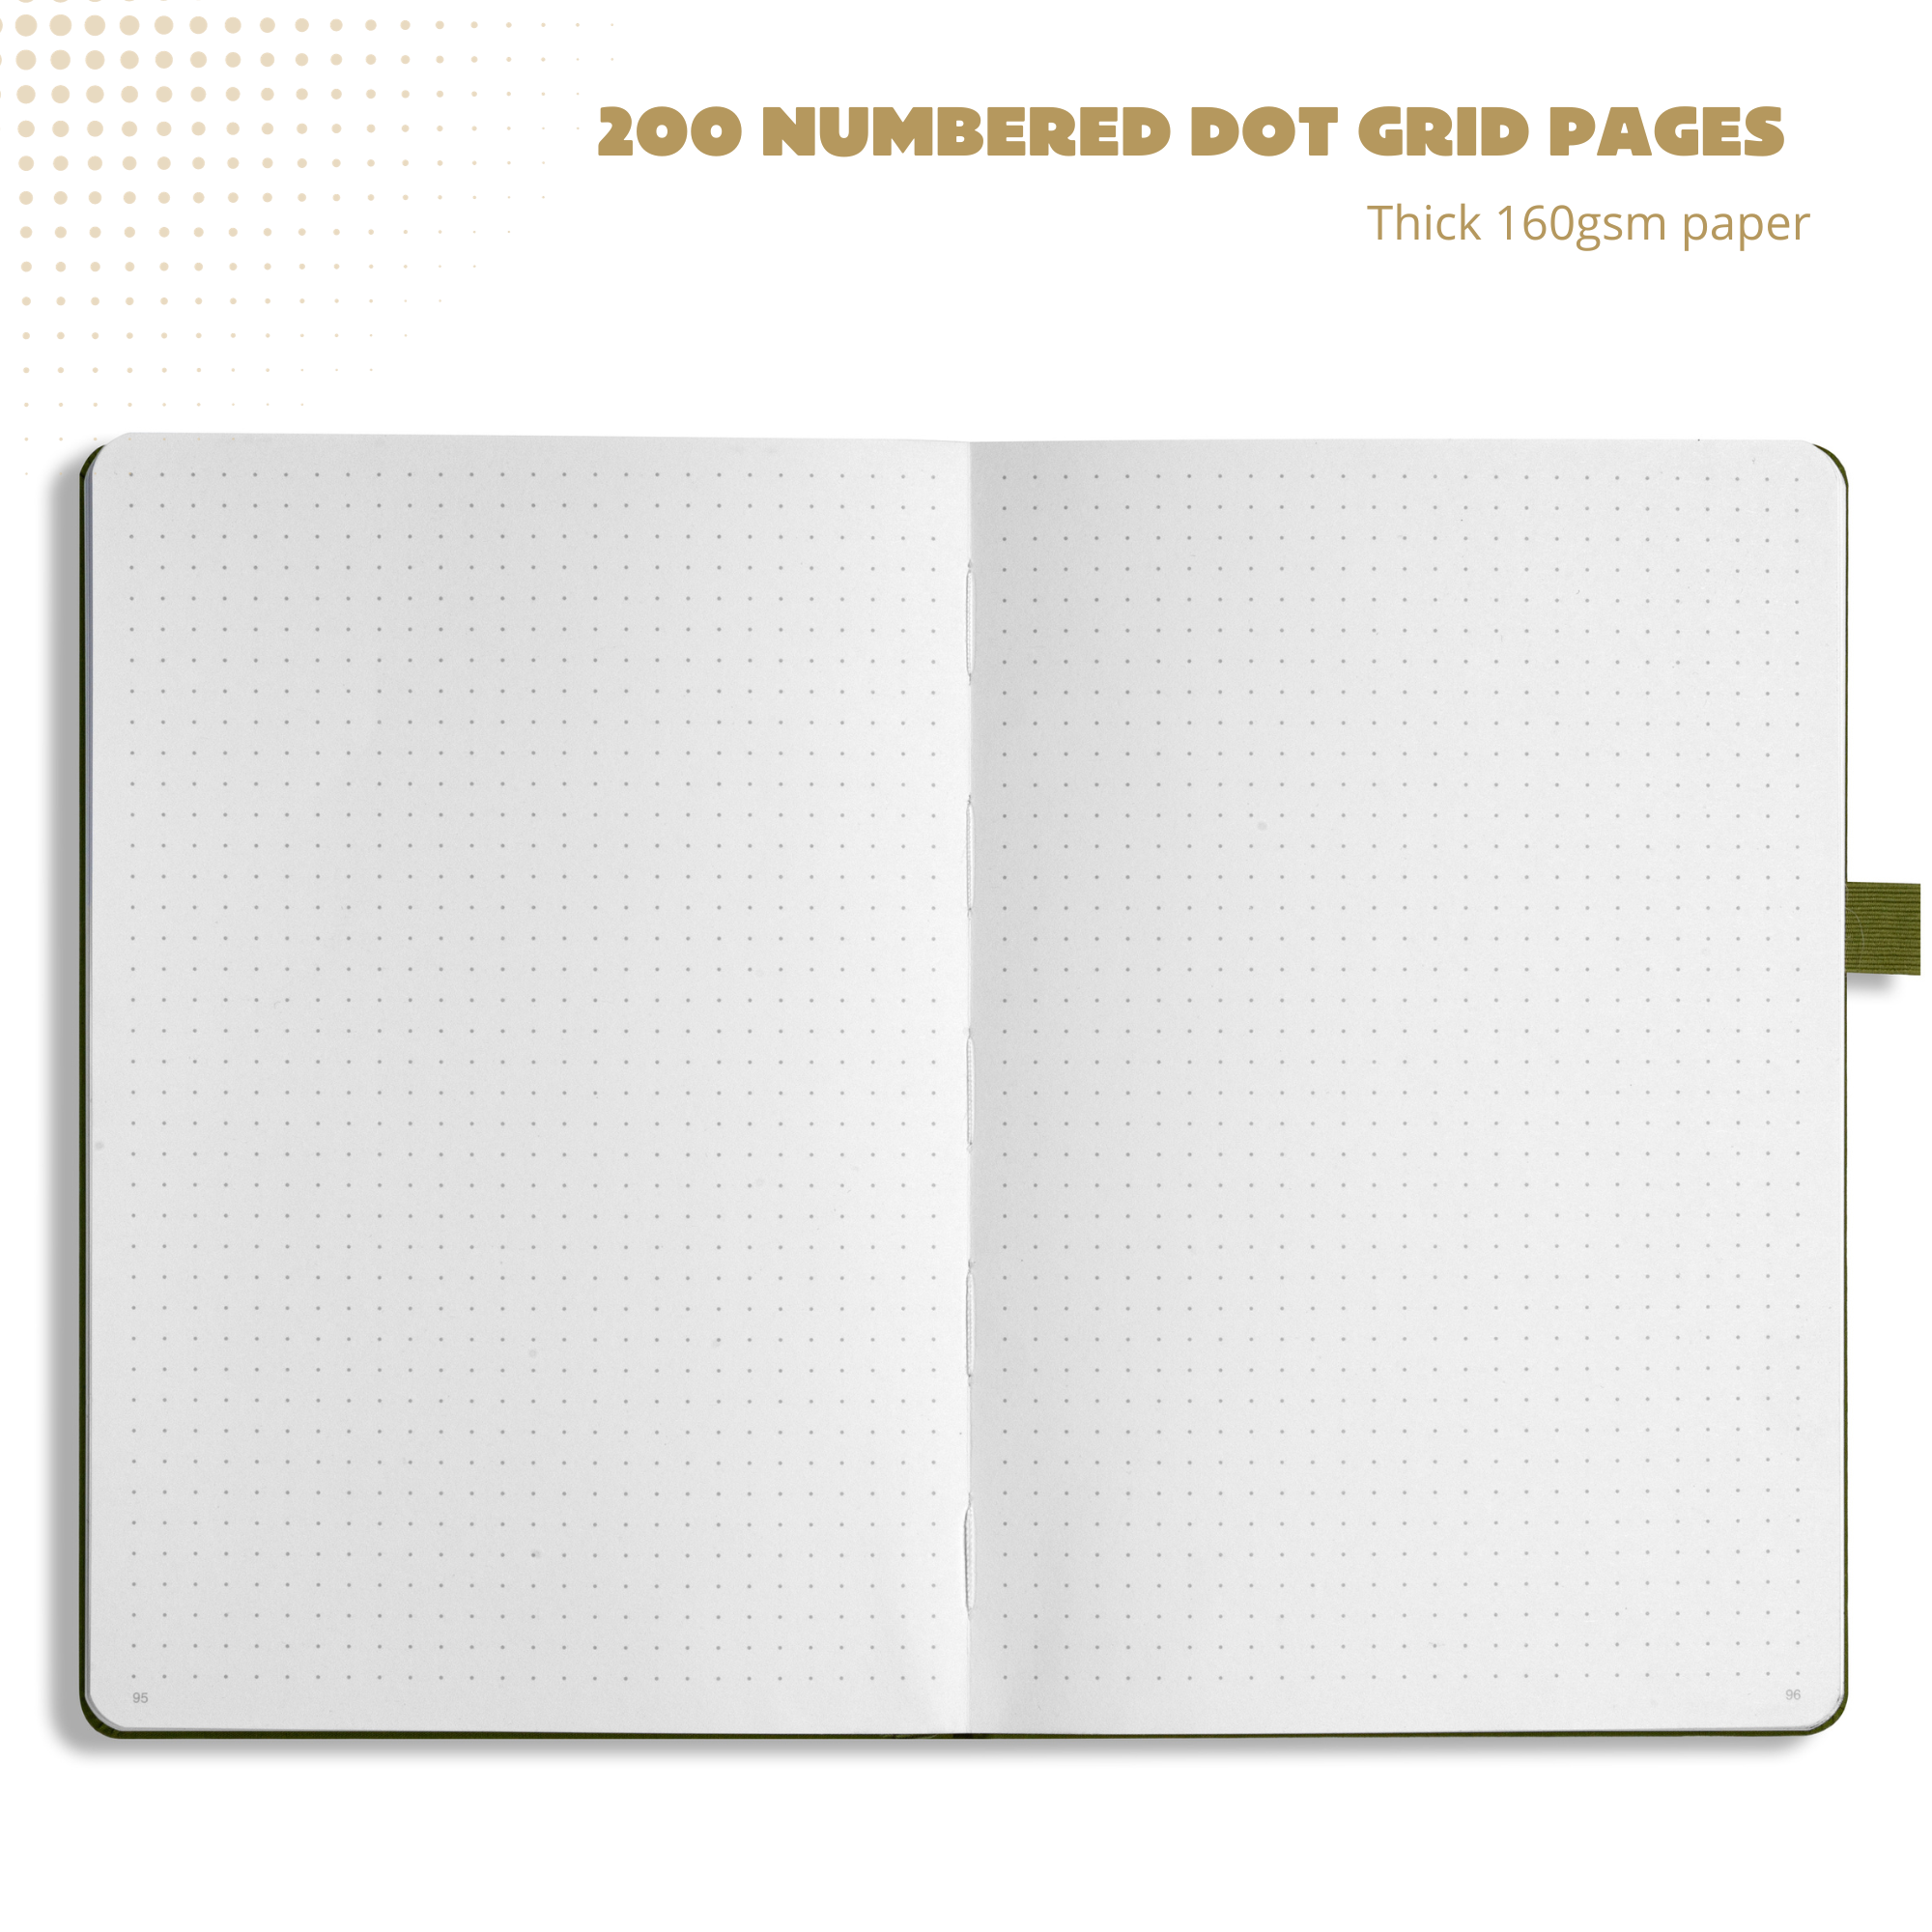 Mysterious Purple FOX And Moon Dotted Journal Sketchbook 160gsm Thick Paper  160 Dot-Grid Pages With Numbered P 1 - P 160